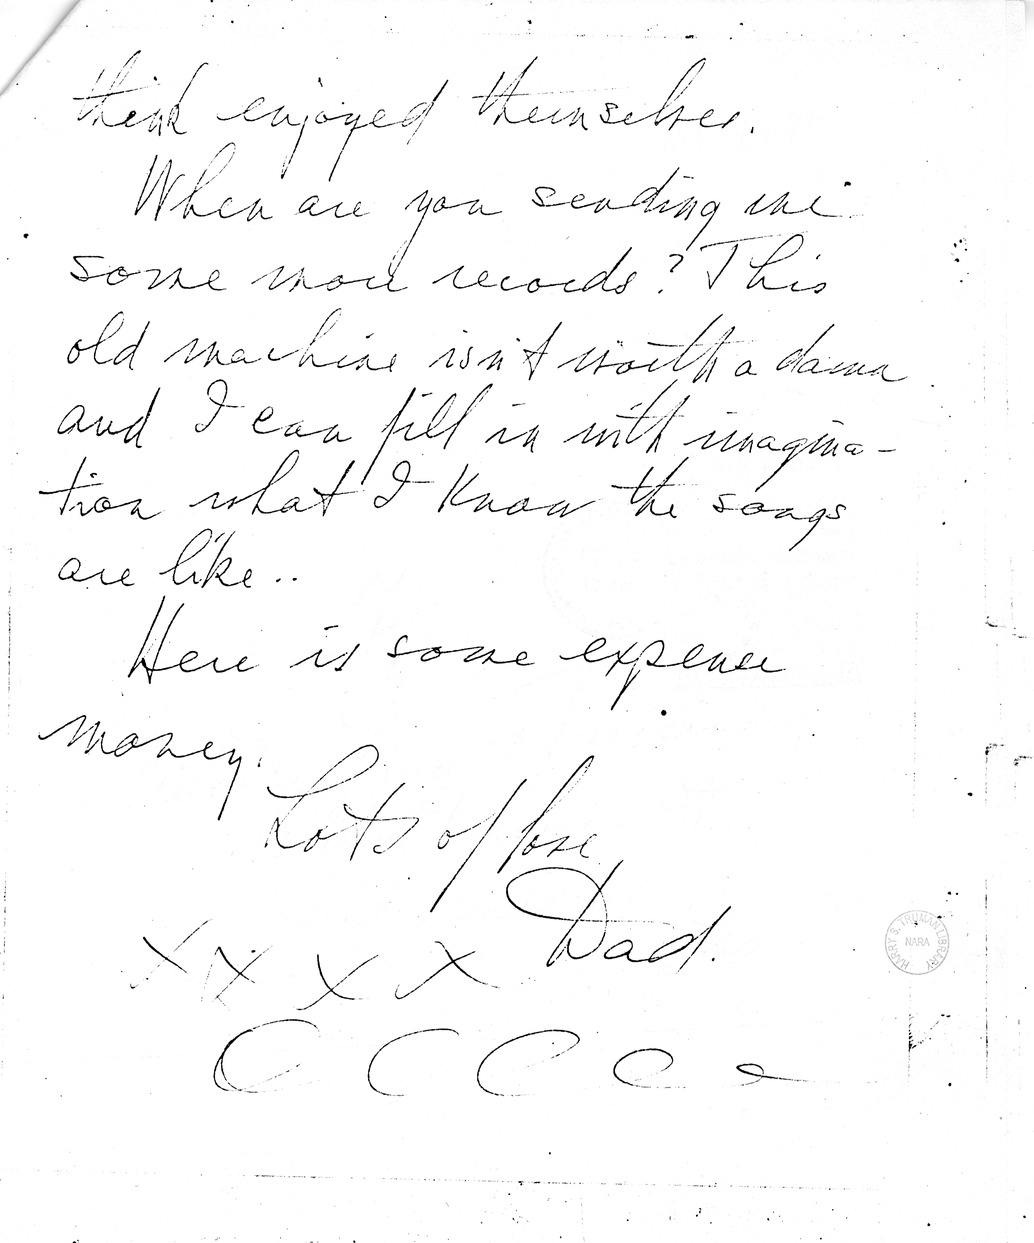 Letter from Harry S. Truman to Margaret Truman